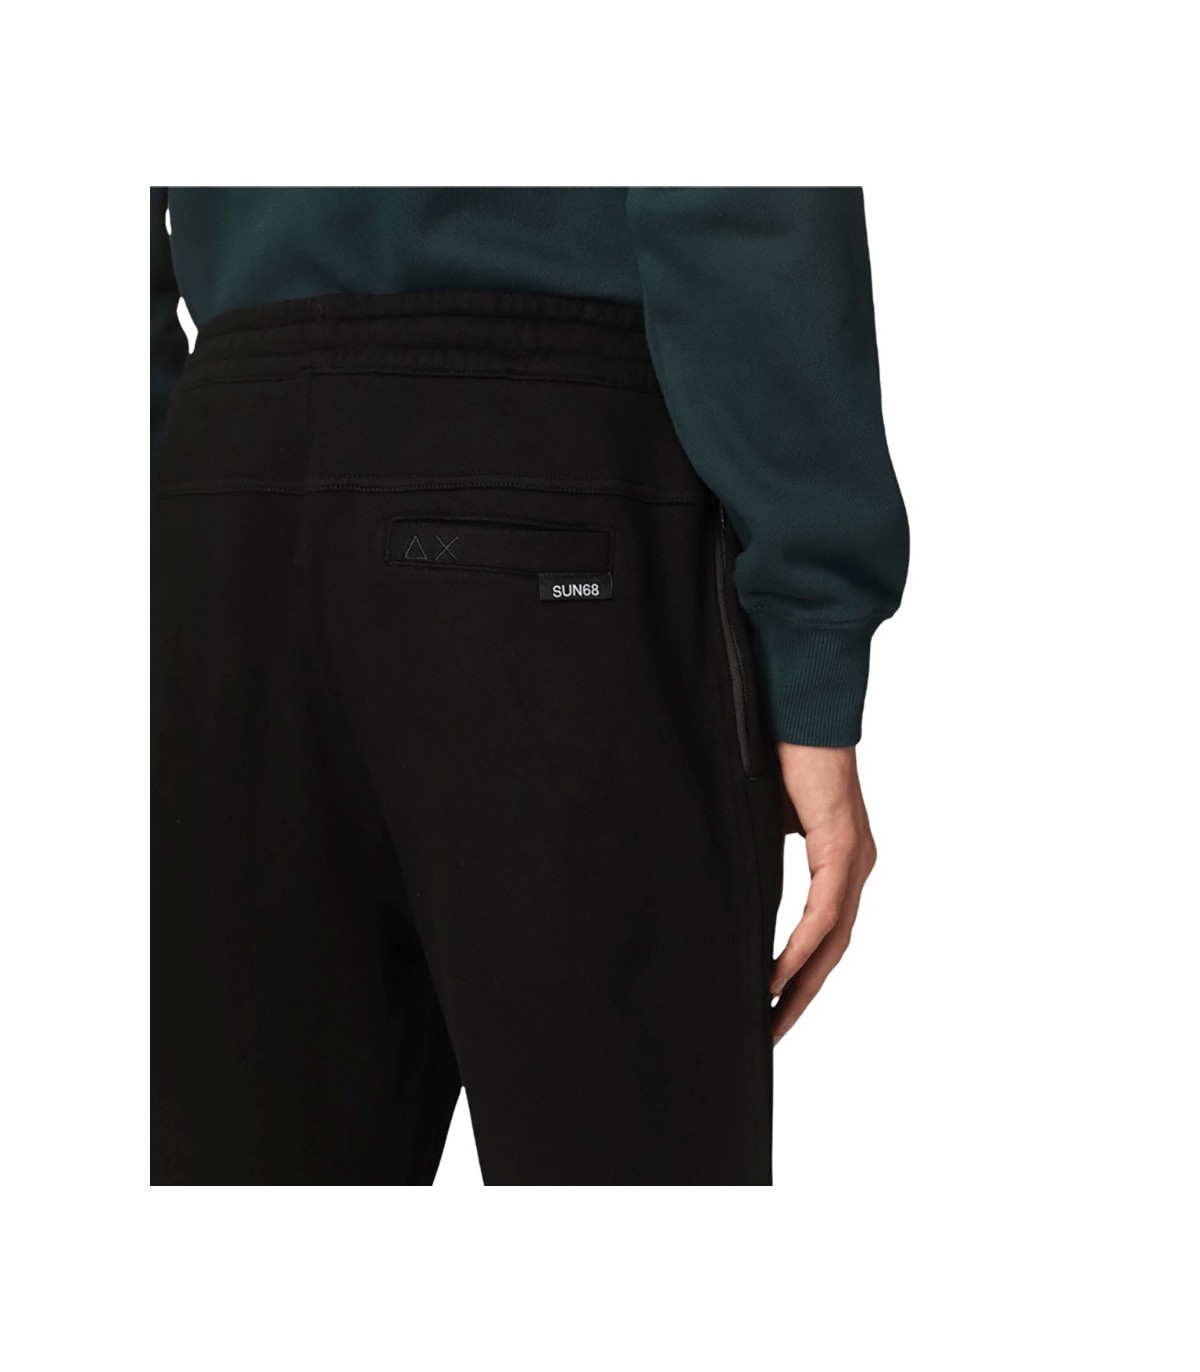 The North Face men's Jogger NSE